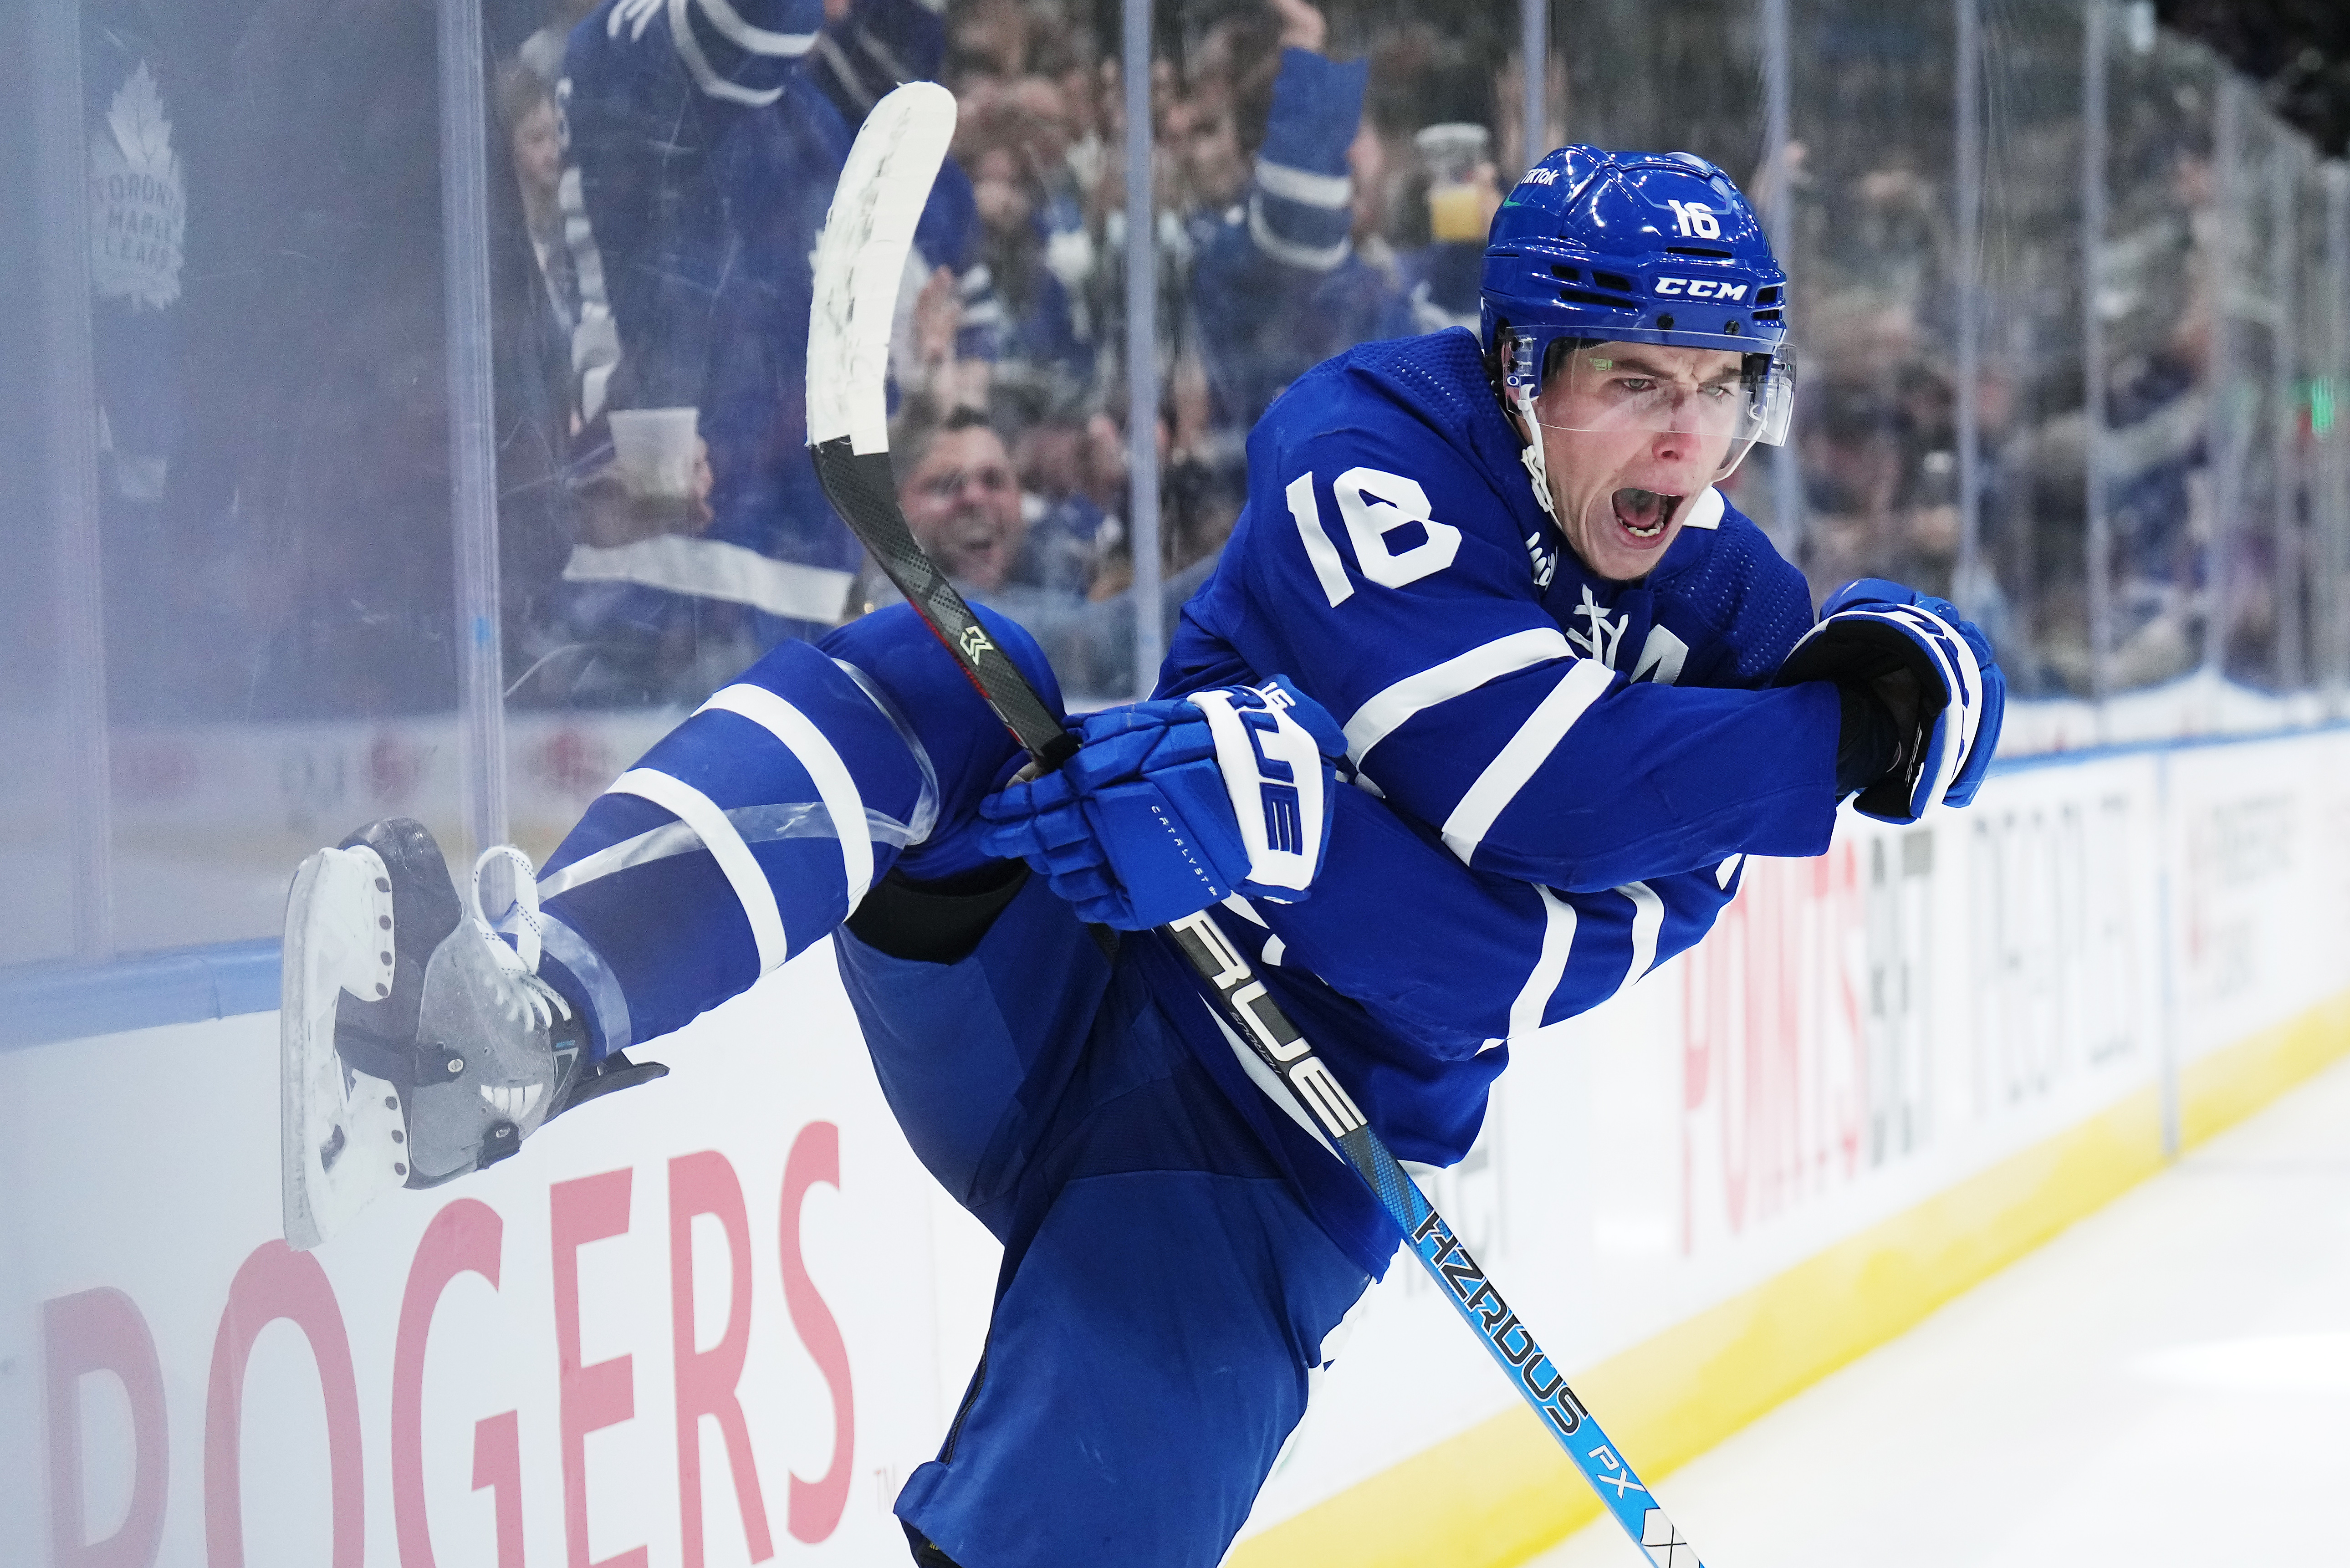 Marner ties franchise record with 18-game point streak as Maple Leafs  defeat Sharks